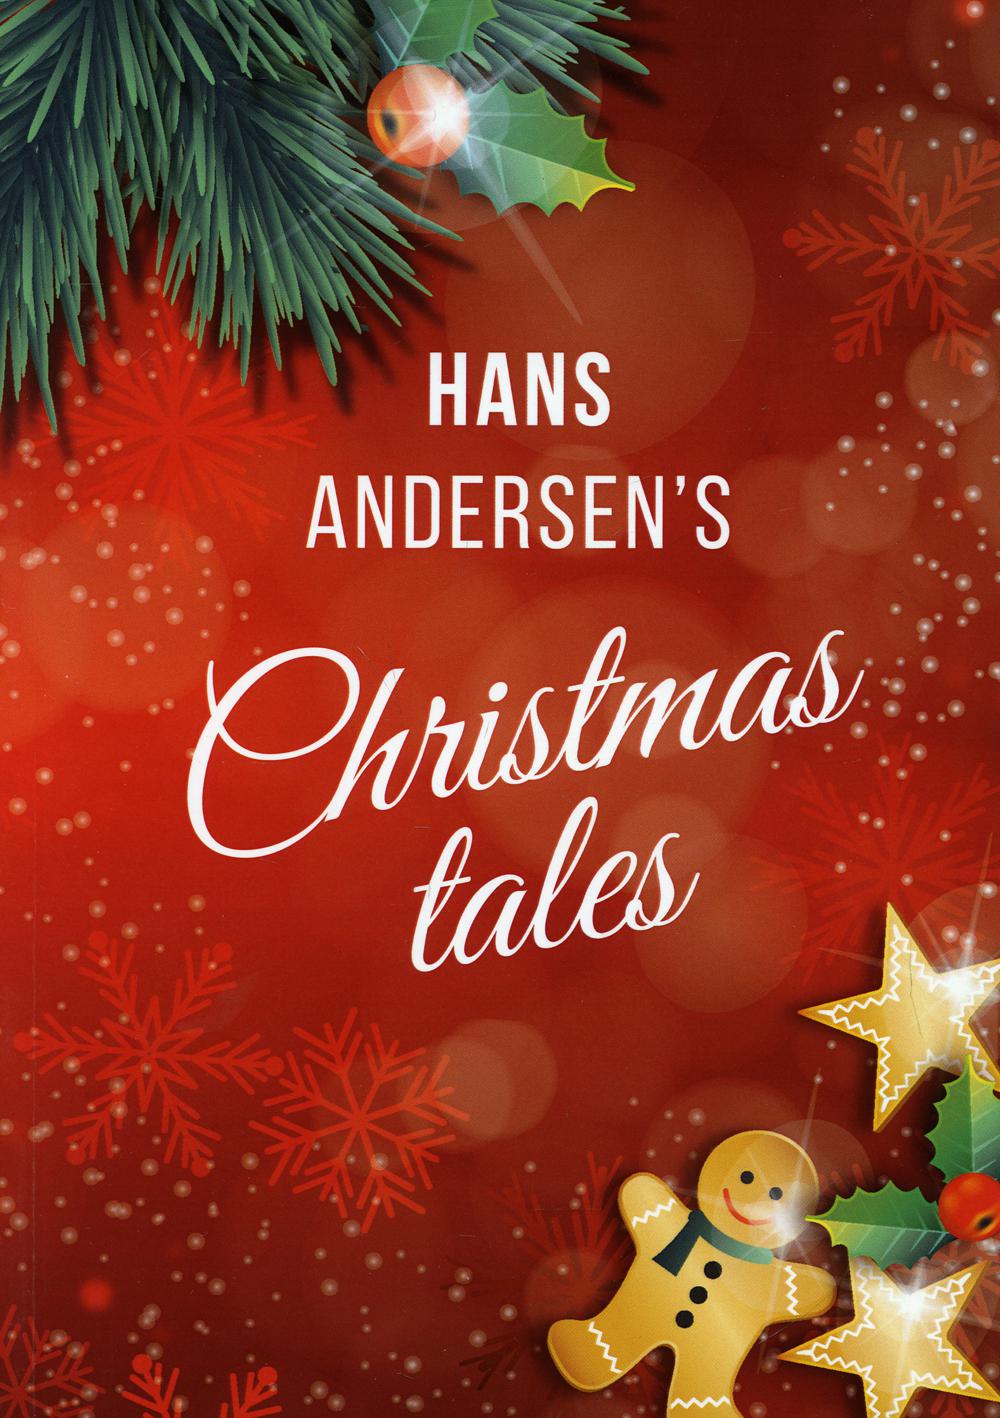 Hans Andersen's Christmas tales. (A Fairy Tales: The Snow Queen; The Fir-Tree; The Snow Man; The Little Match Girl)